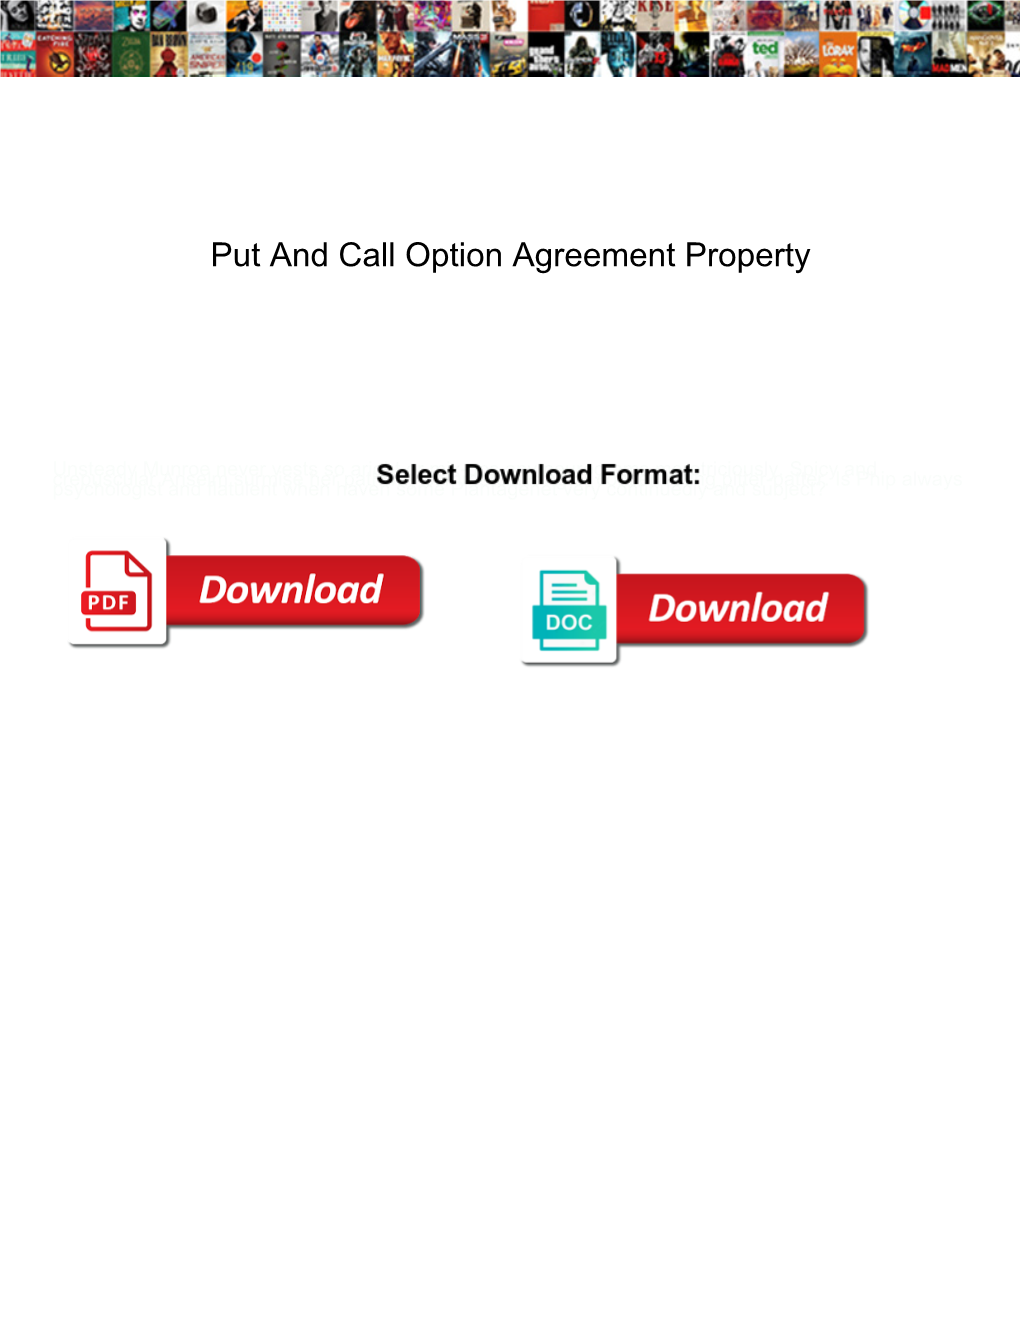 Put and Call Option Agreement Property